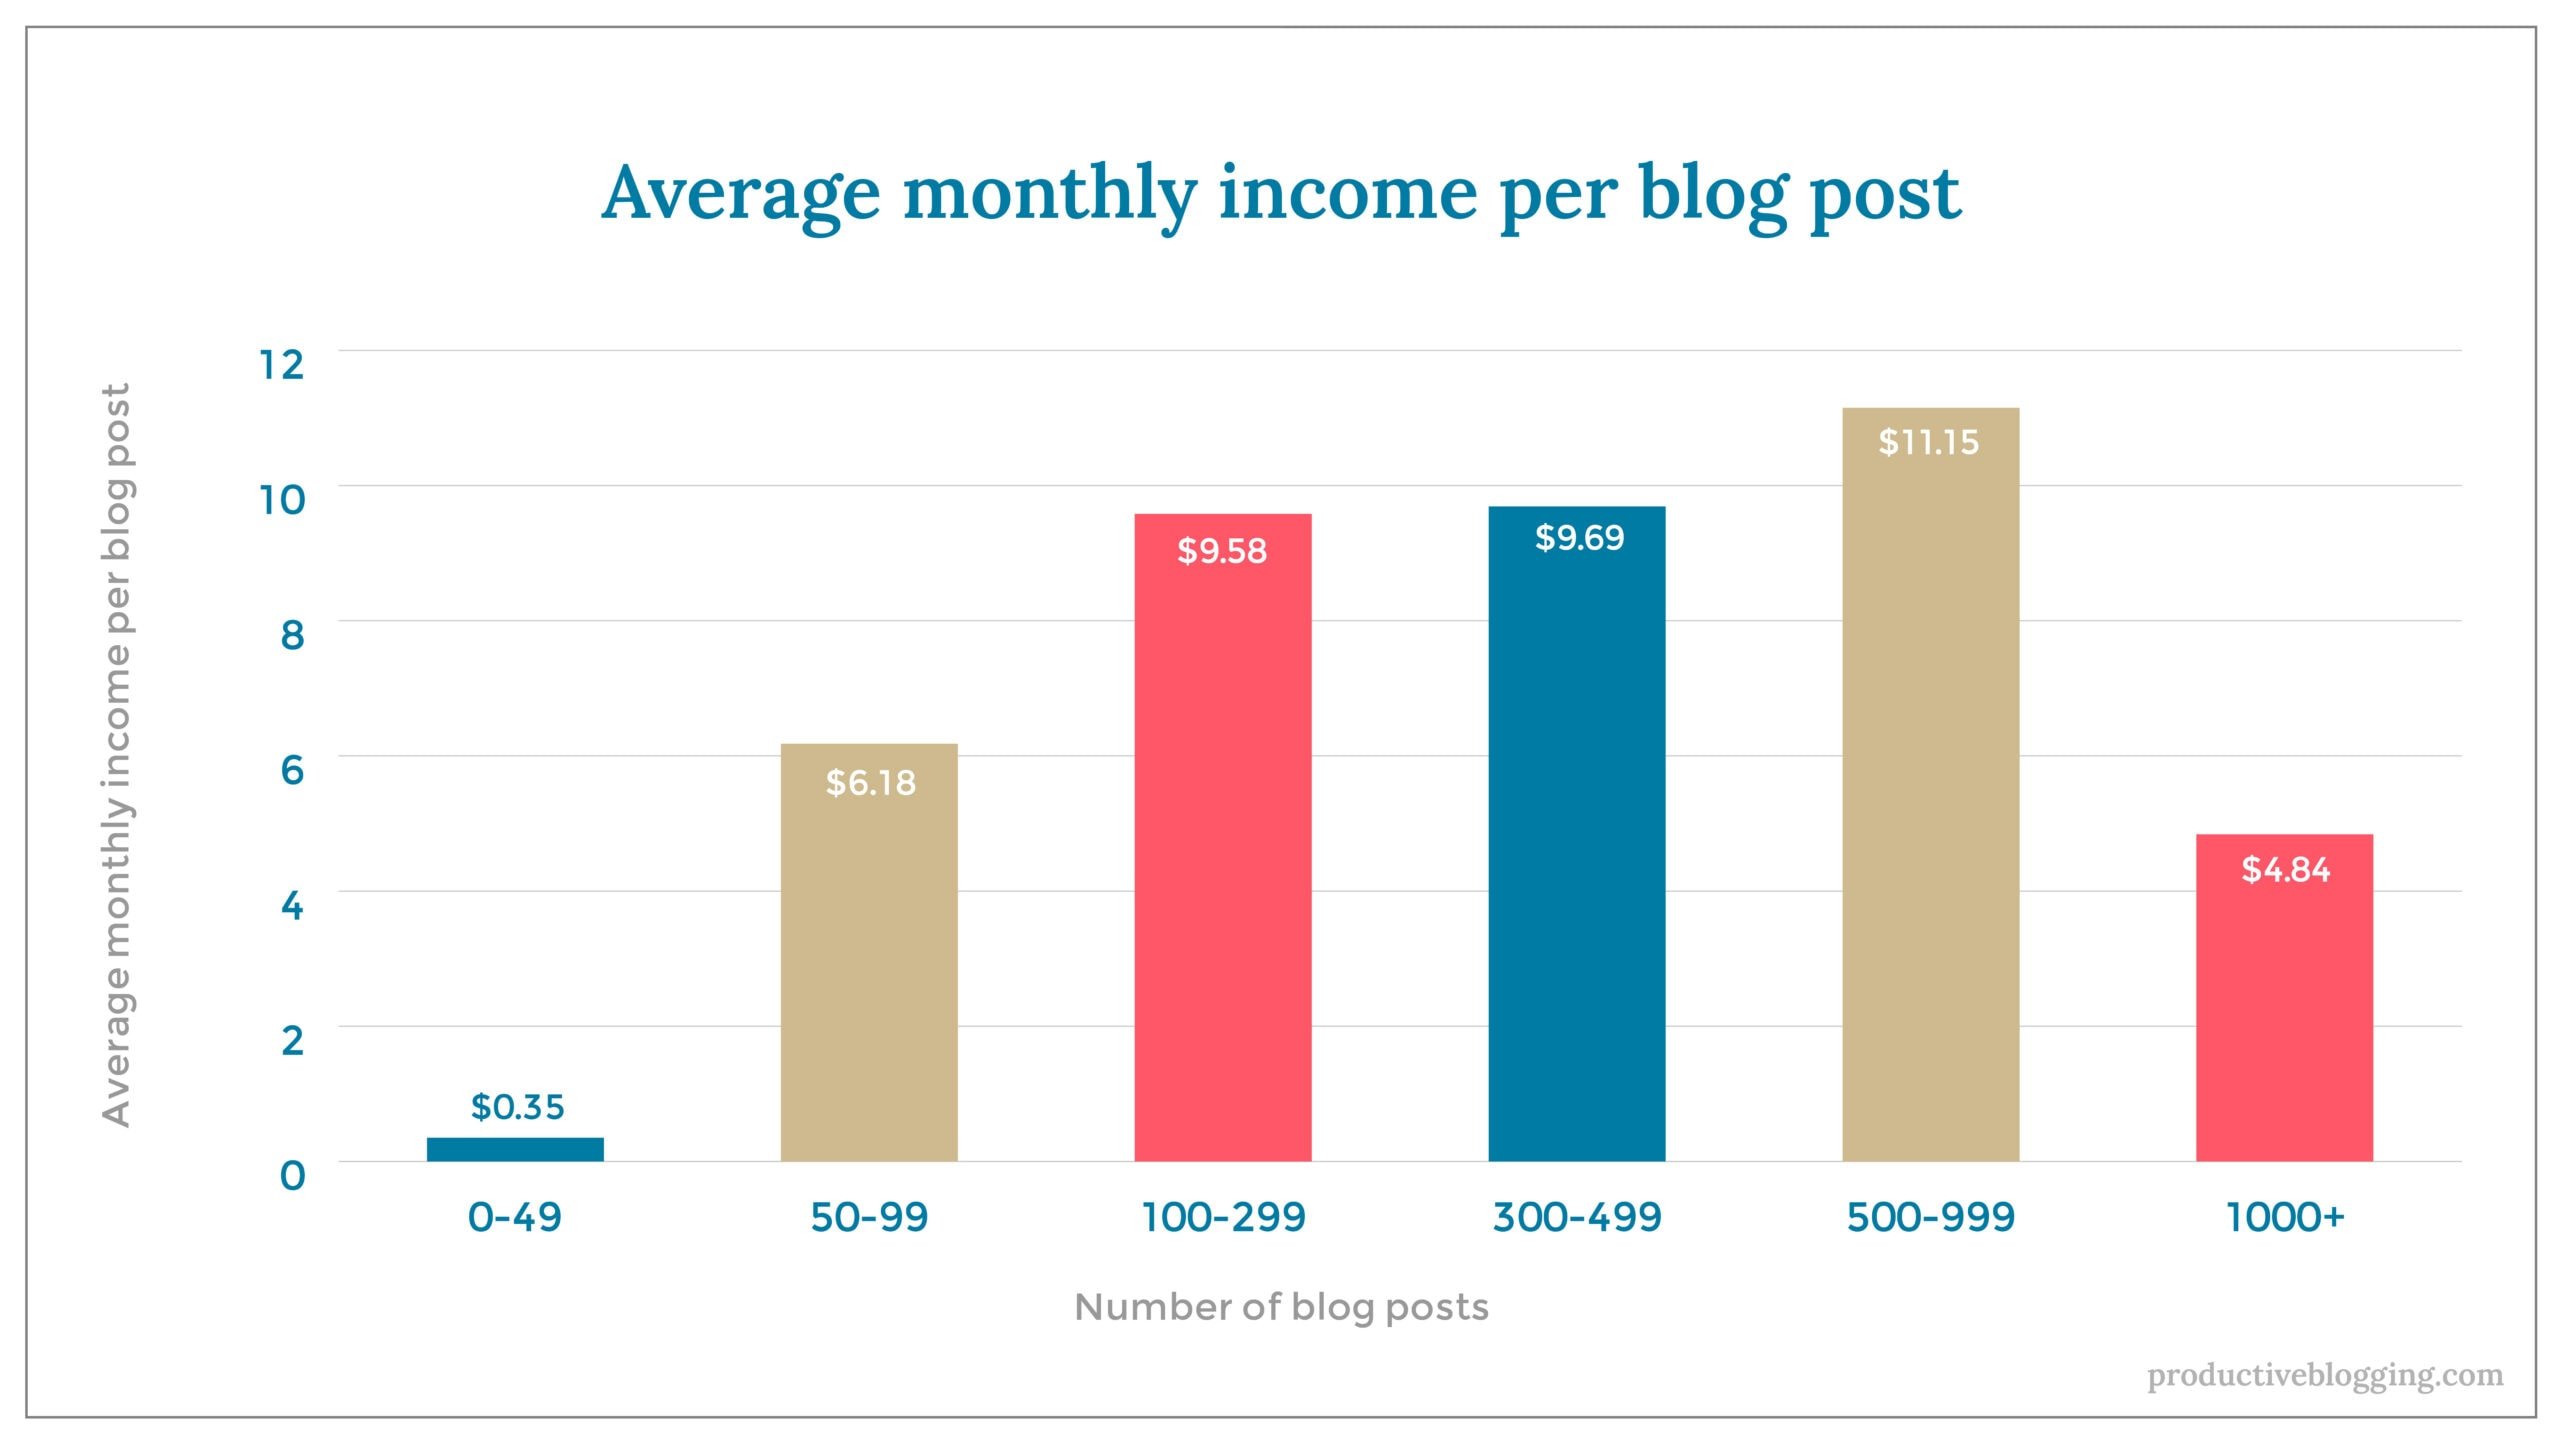 Average monthly income per blog postX axis: Number of blog postsY axis: Average monthly income per blog post0-49 		$0.3550-99		$6.18100-299	$9.58300-499	$9.69500-999	$11.151000+		$4.84